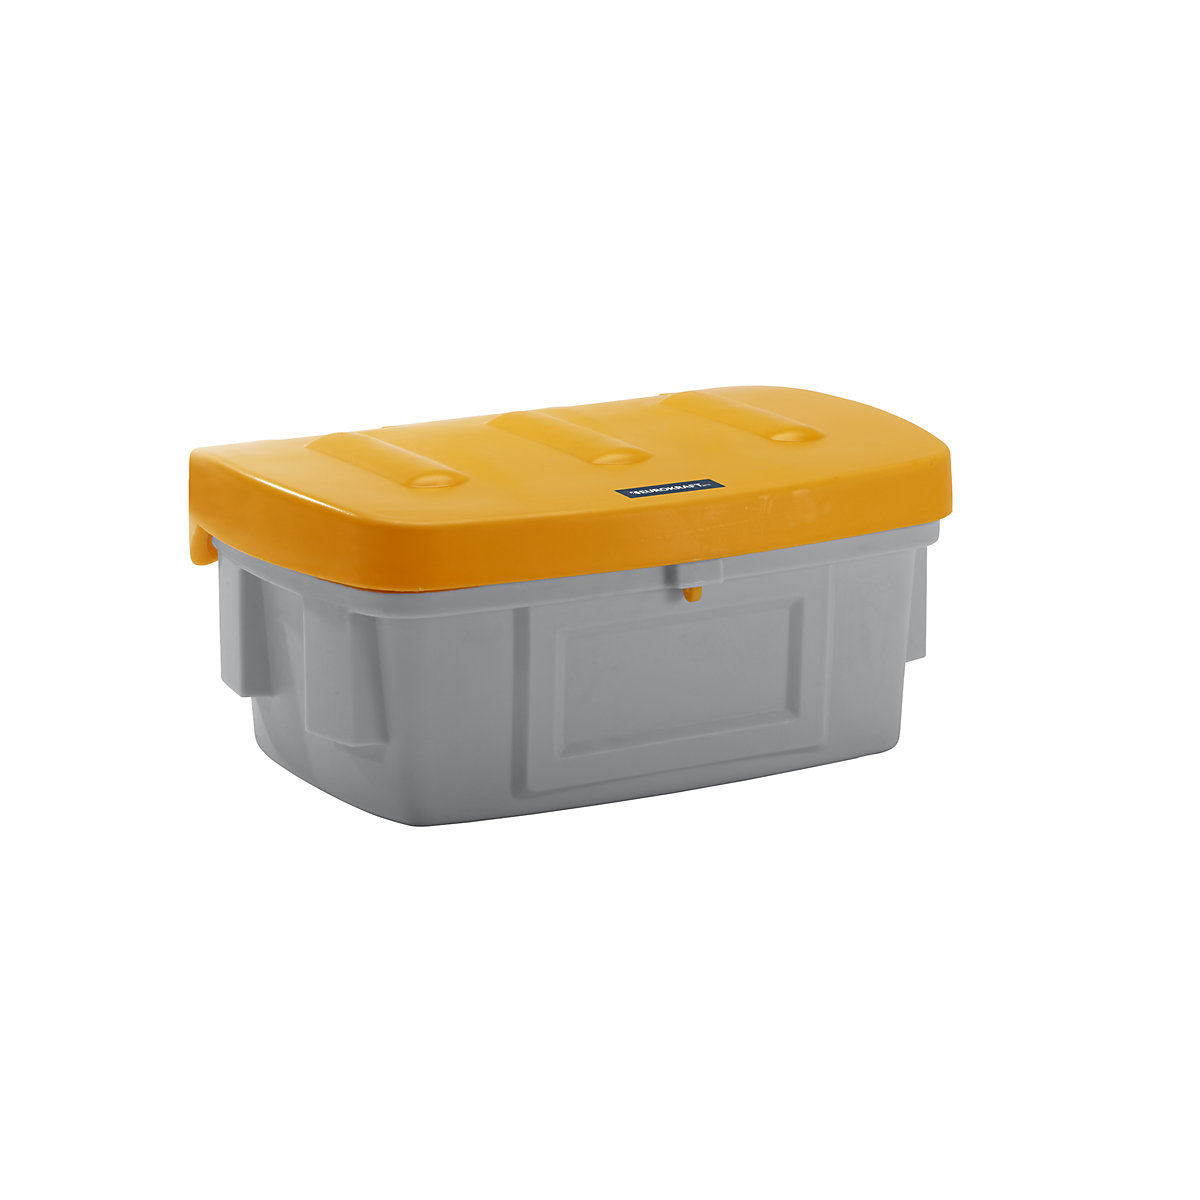 Universal / grit container – eurokraft pro, without dispenser opening, 100 l, orange lid-12